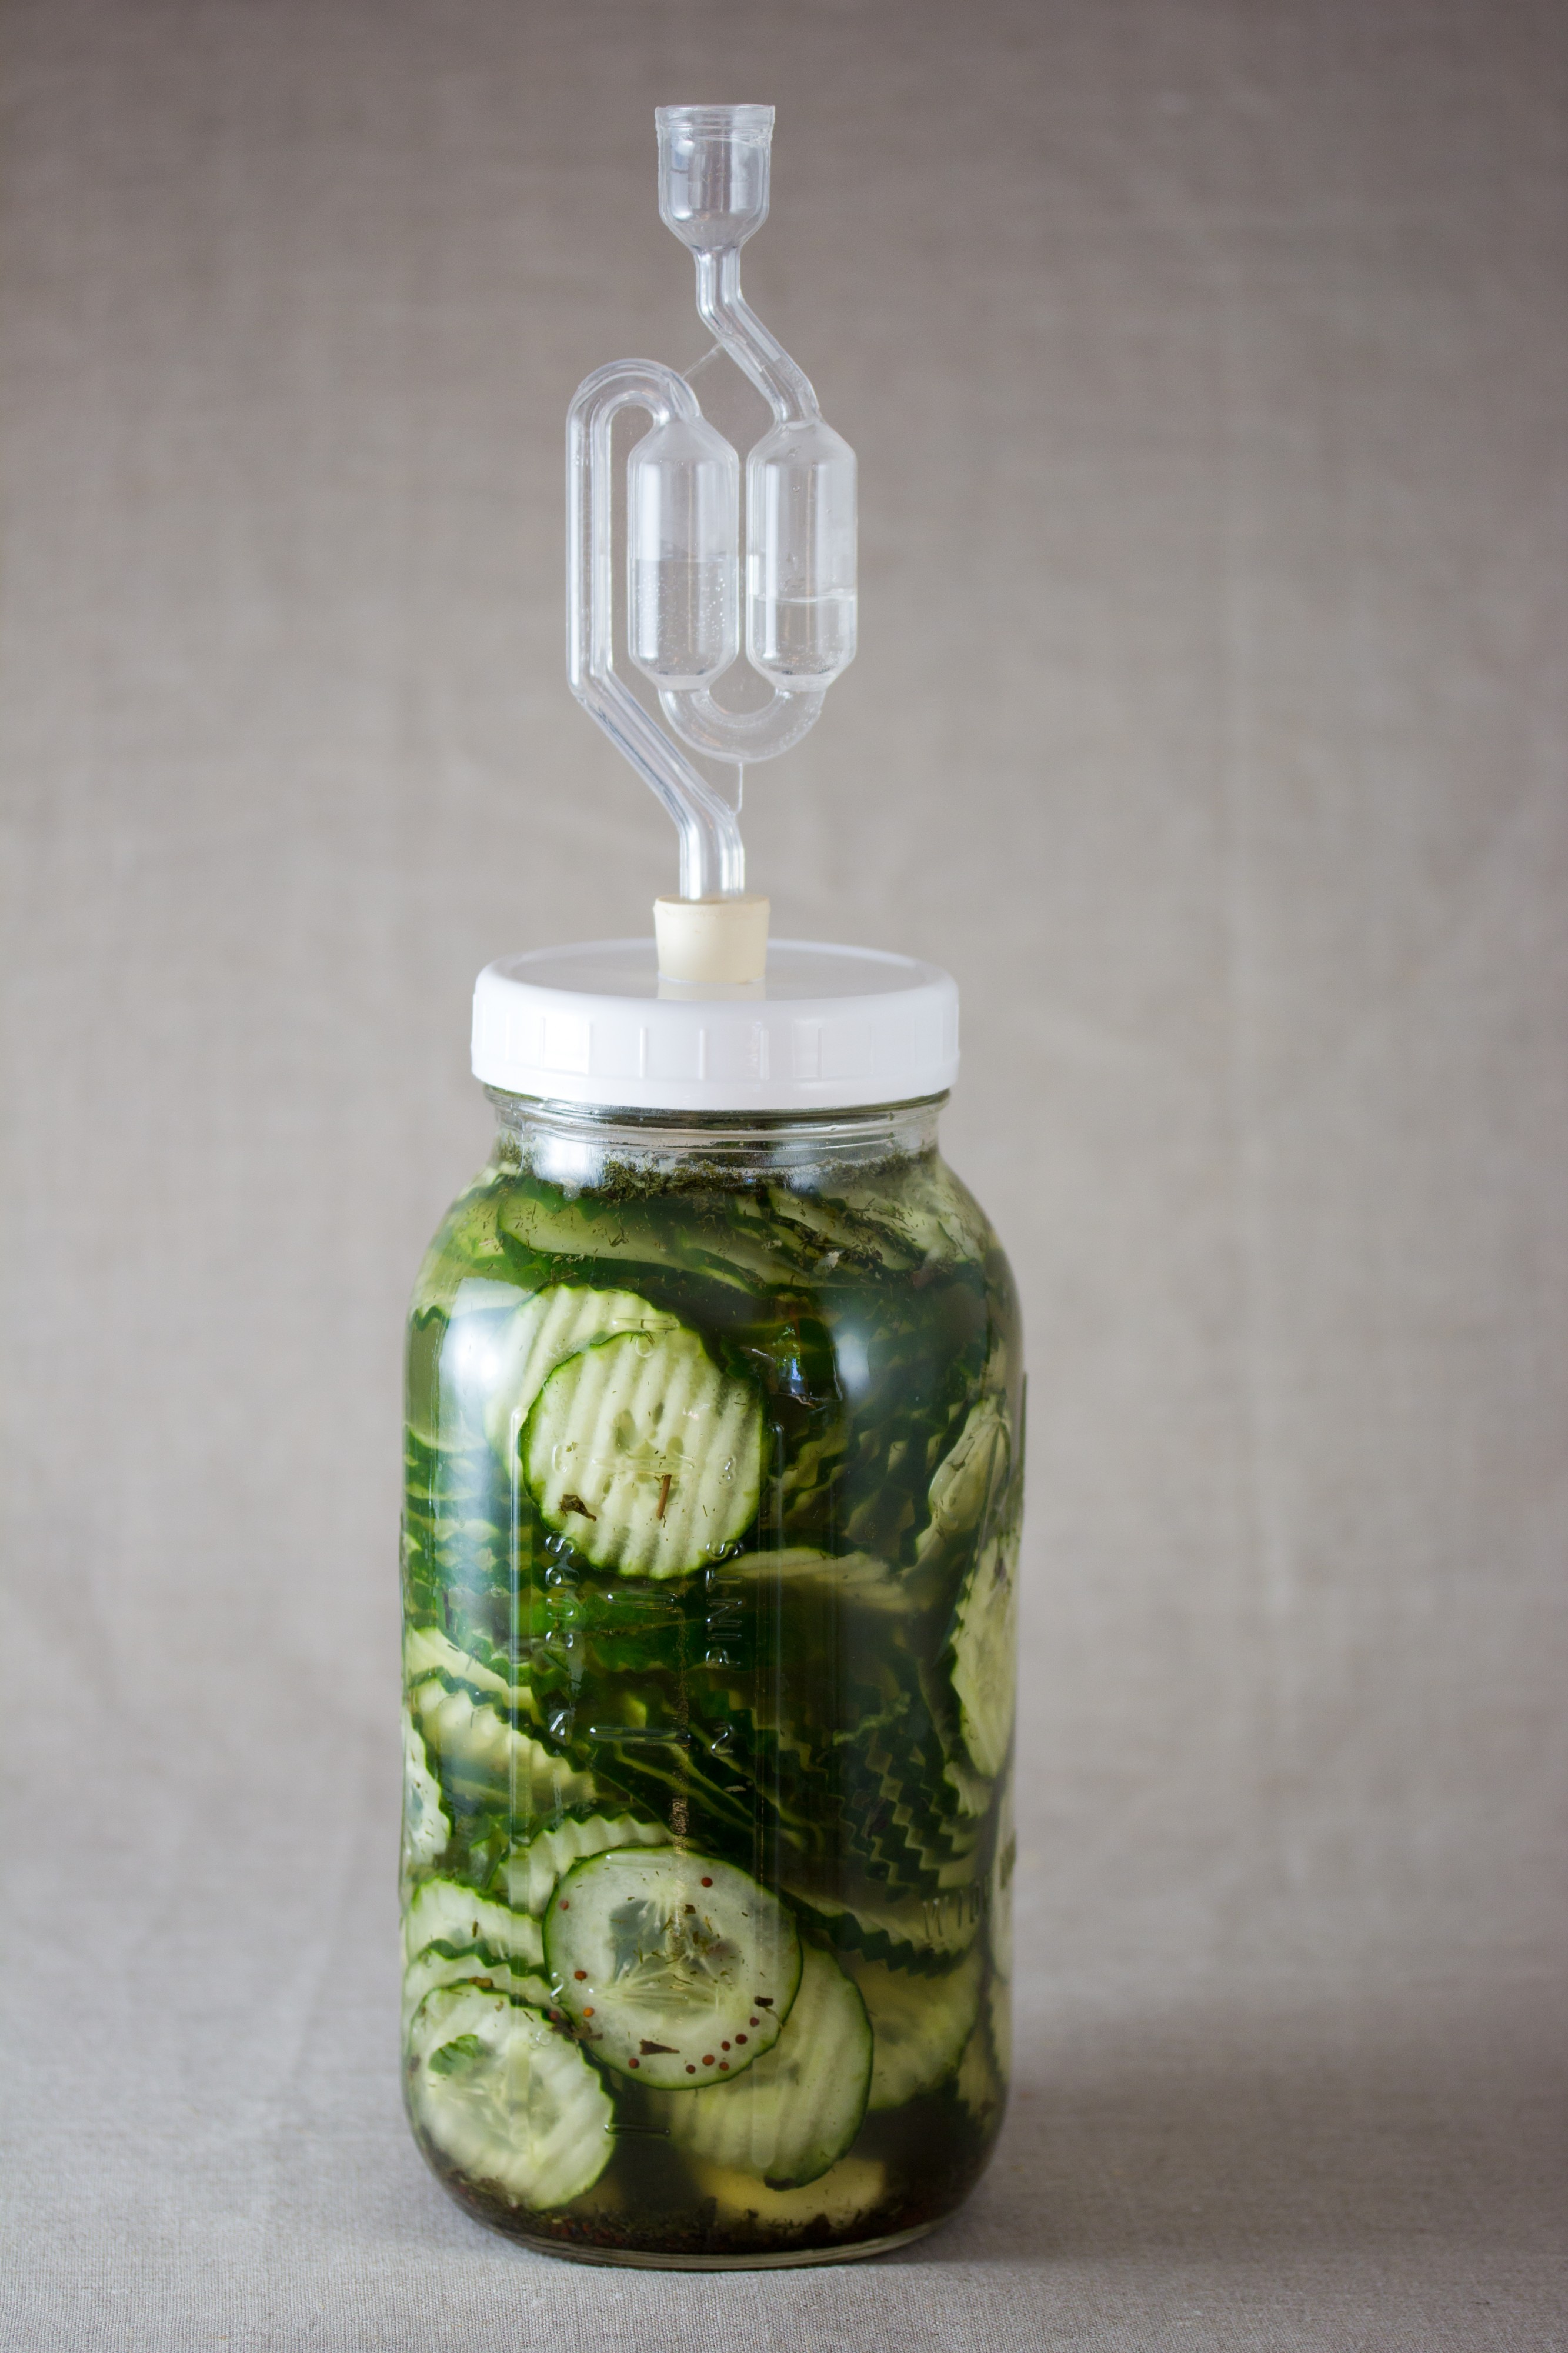 Wild Fermented Pickles (8681631197)